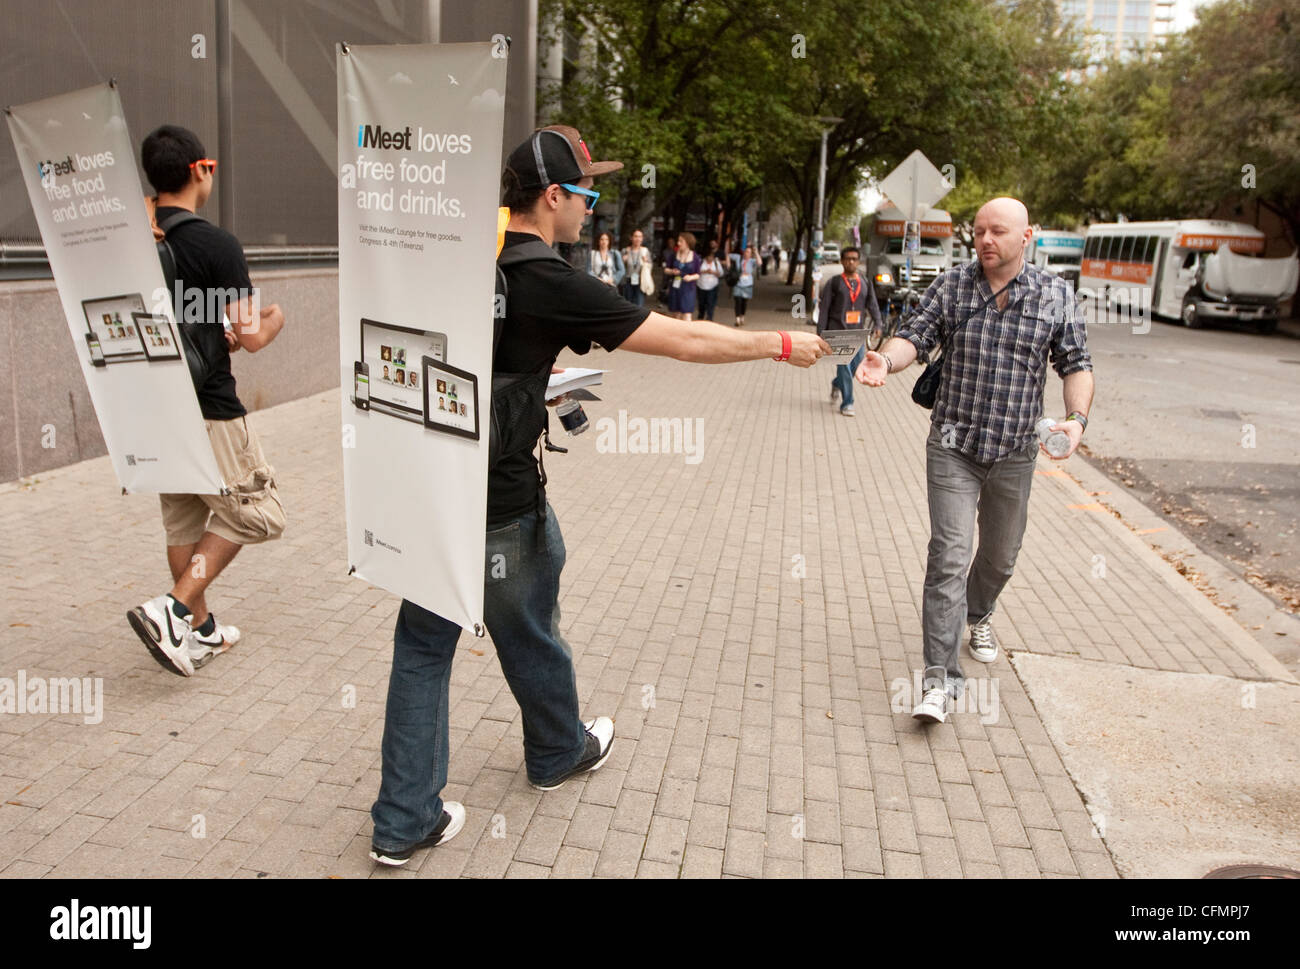 SXSW Interactive convention draws thousands. Companies use various methods of marketing to attract customers walking billboard Stock Photo